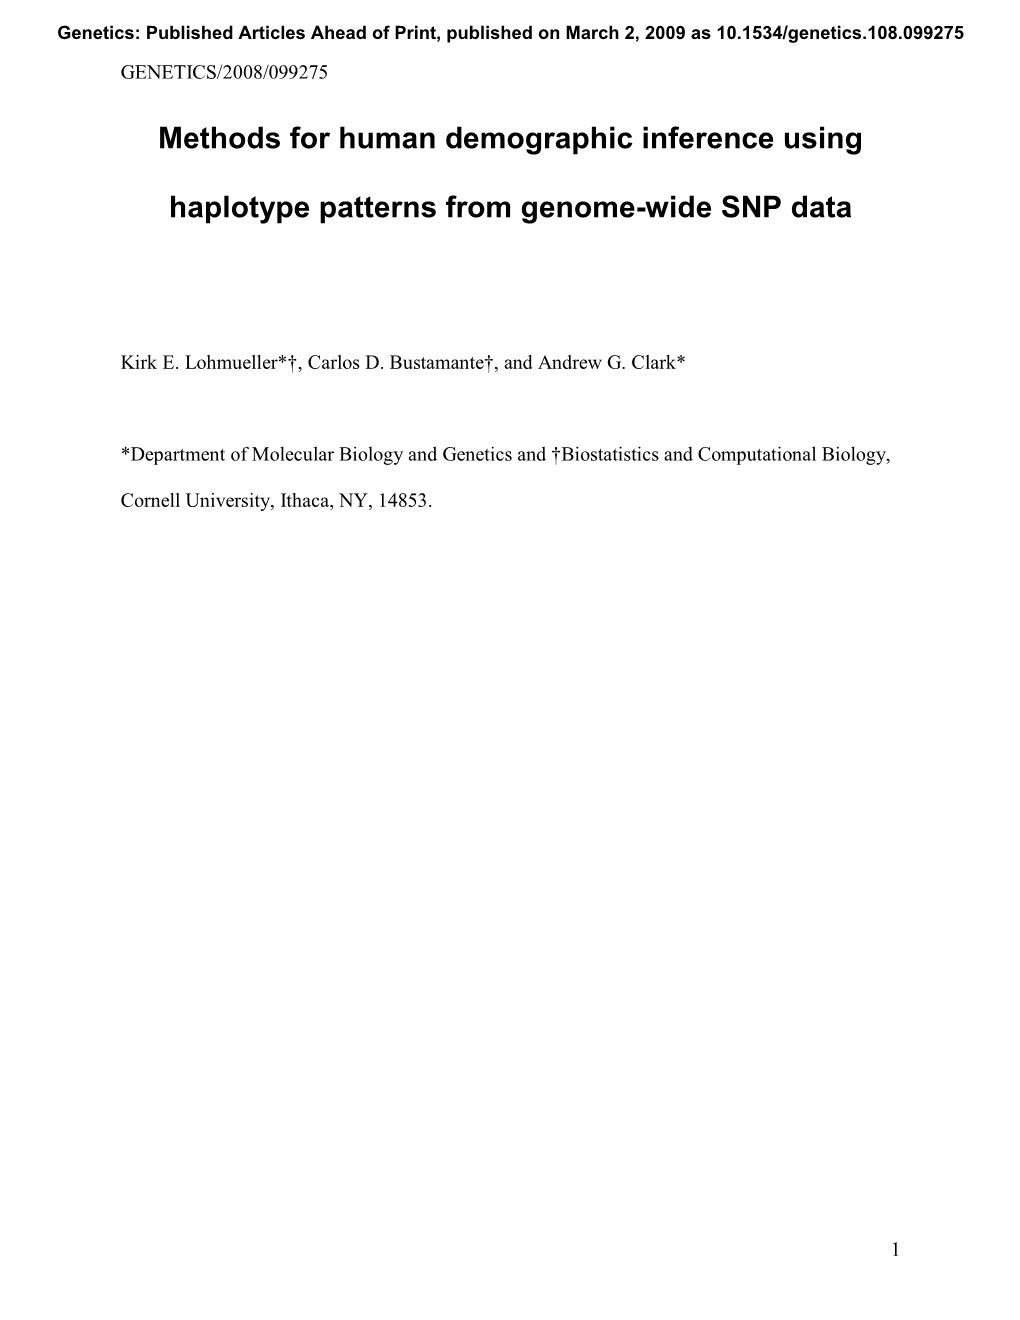 Methods for Human Demographic Inference Using Haplotype Patterns from Genome-Wide SNP Data